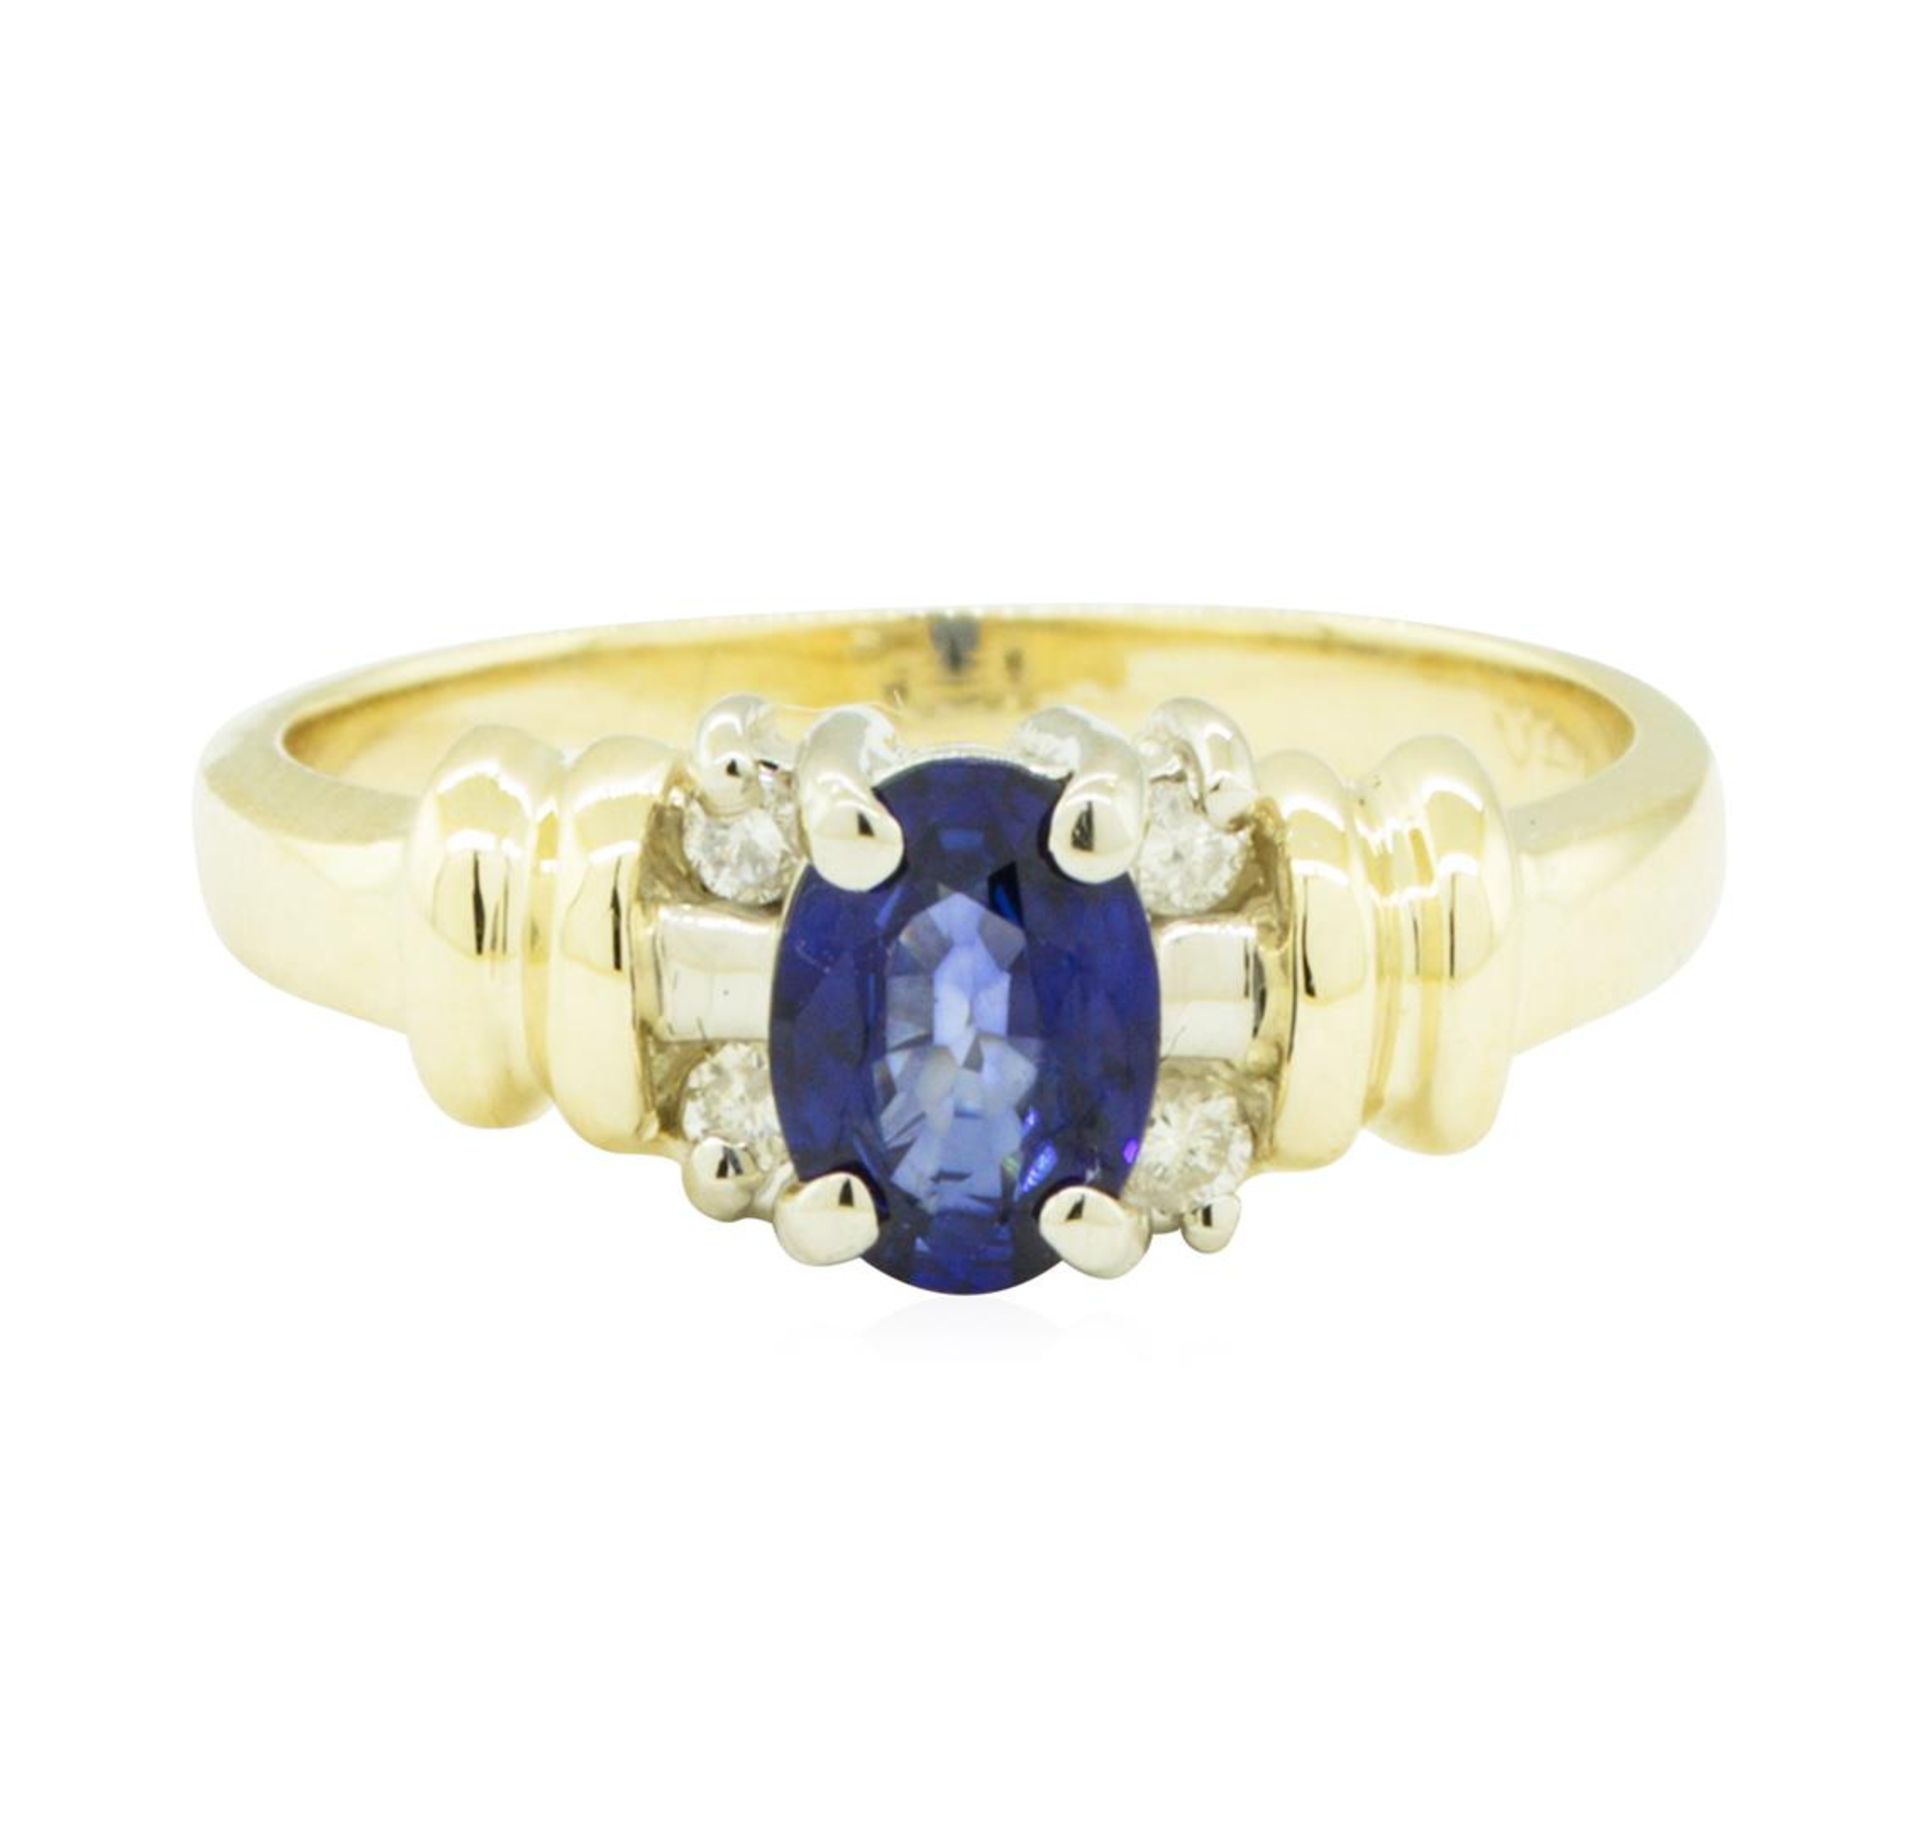 1.00 ctw Blue Sapphire and Diamond Ring - 14KT Yellow and White Gold - Image 2 of 4